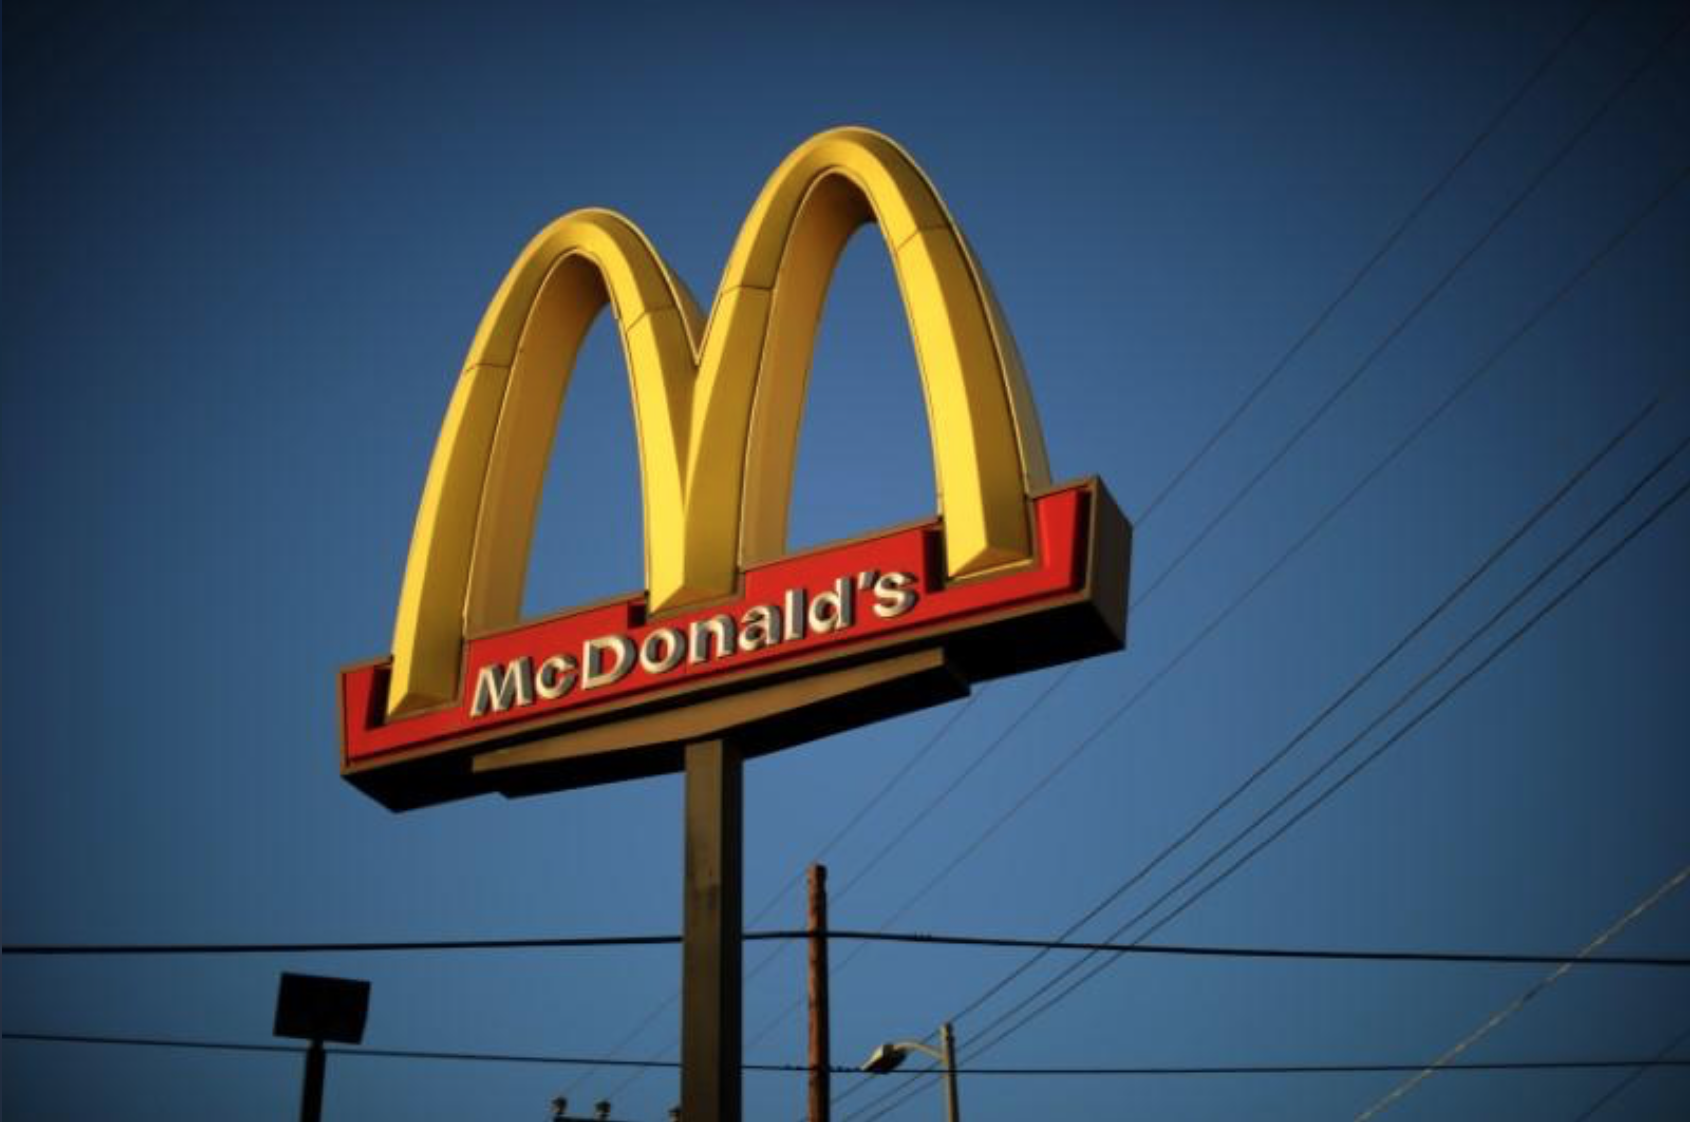 10 Female McDonald’s Workers File Sexual Harassment Claims Across U.S.